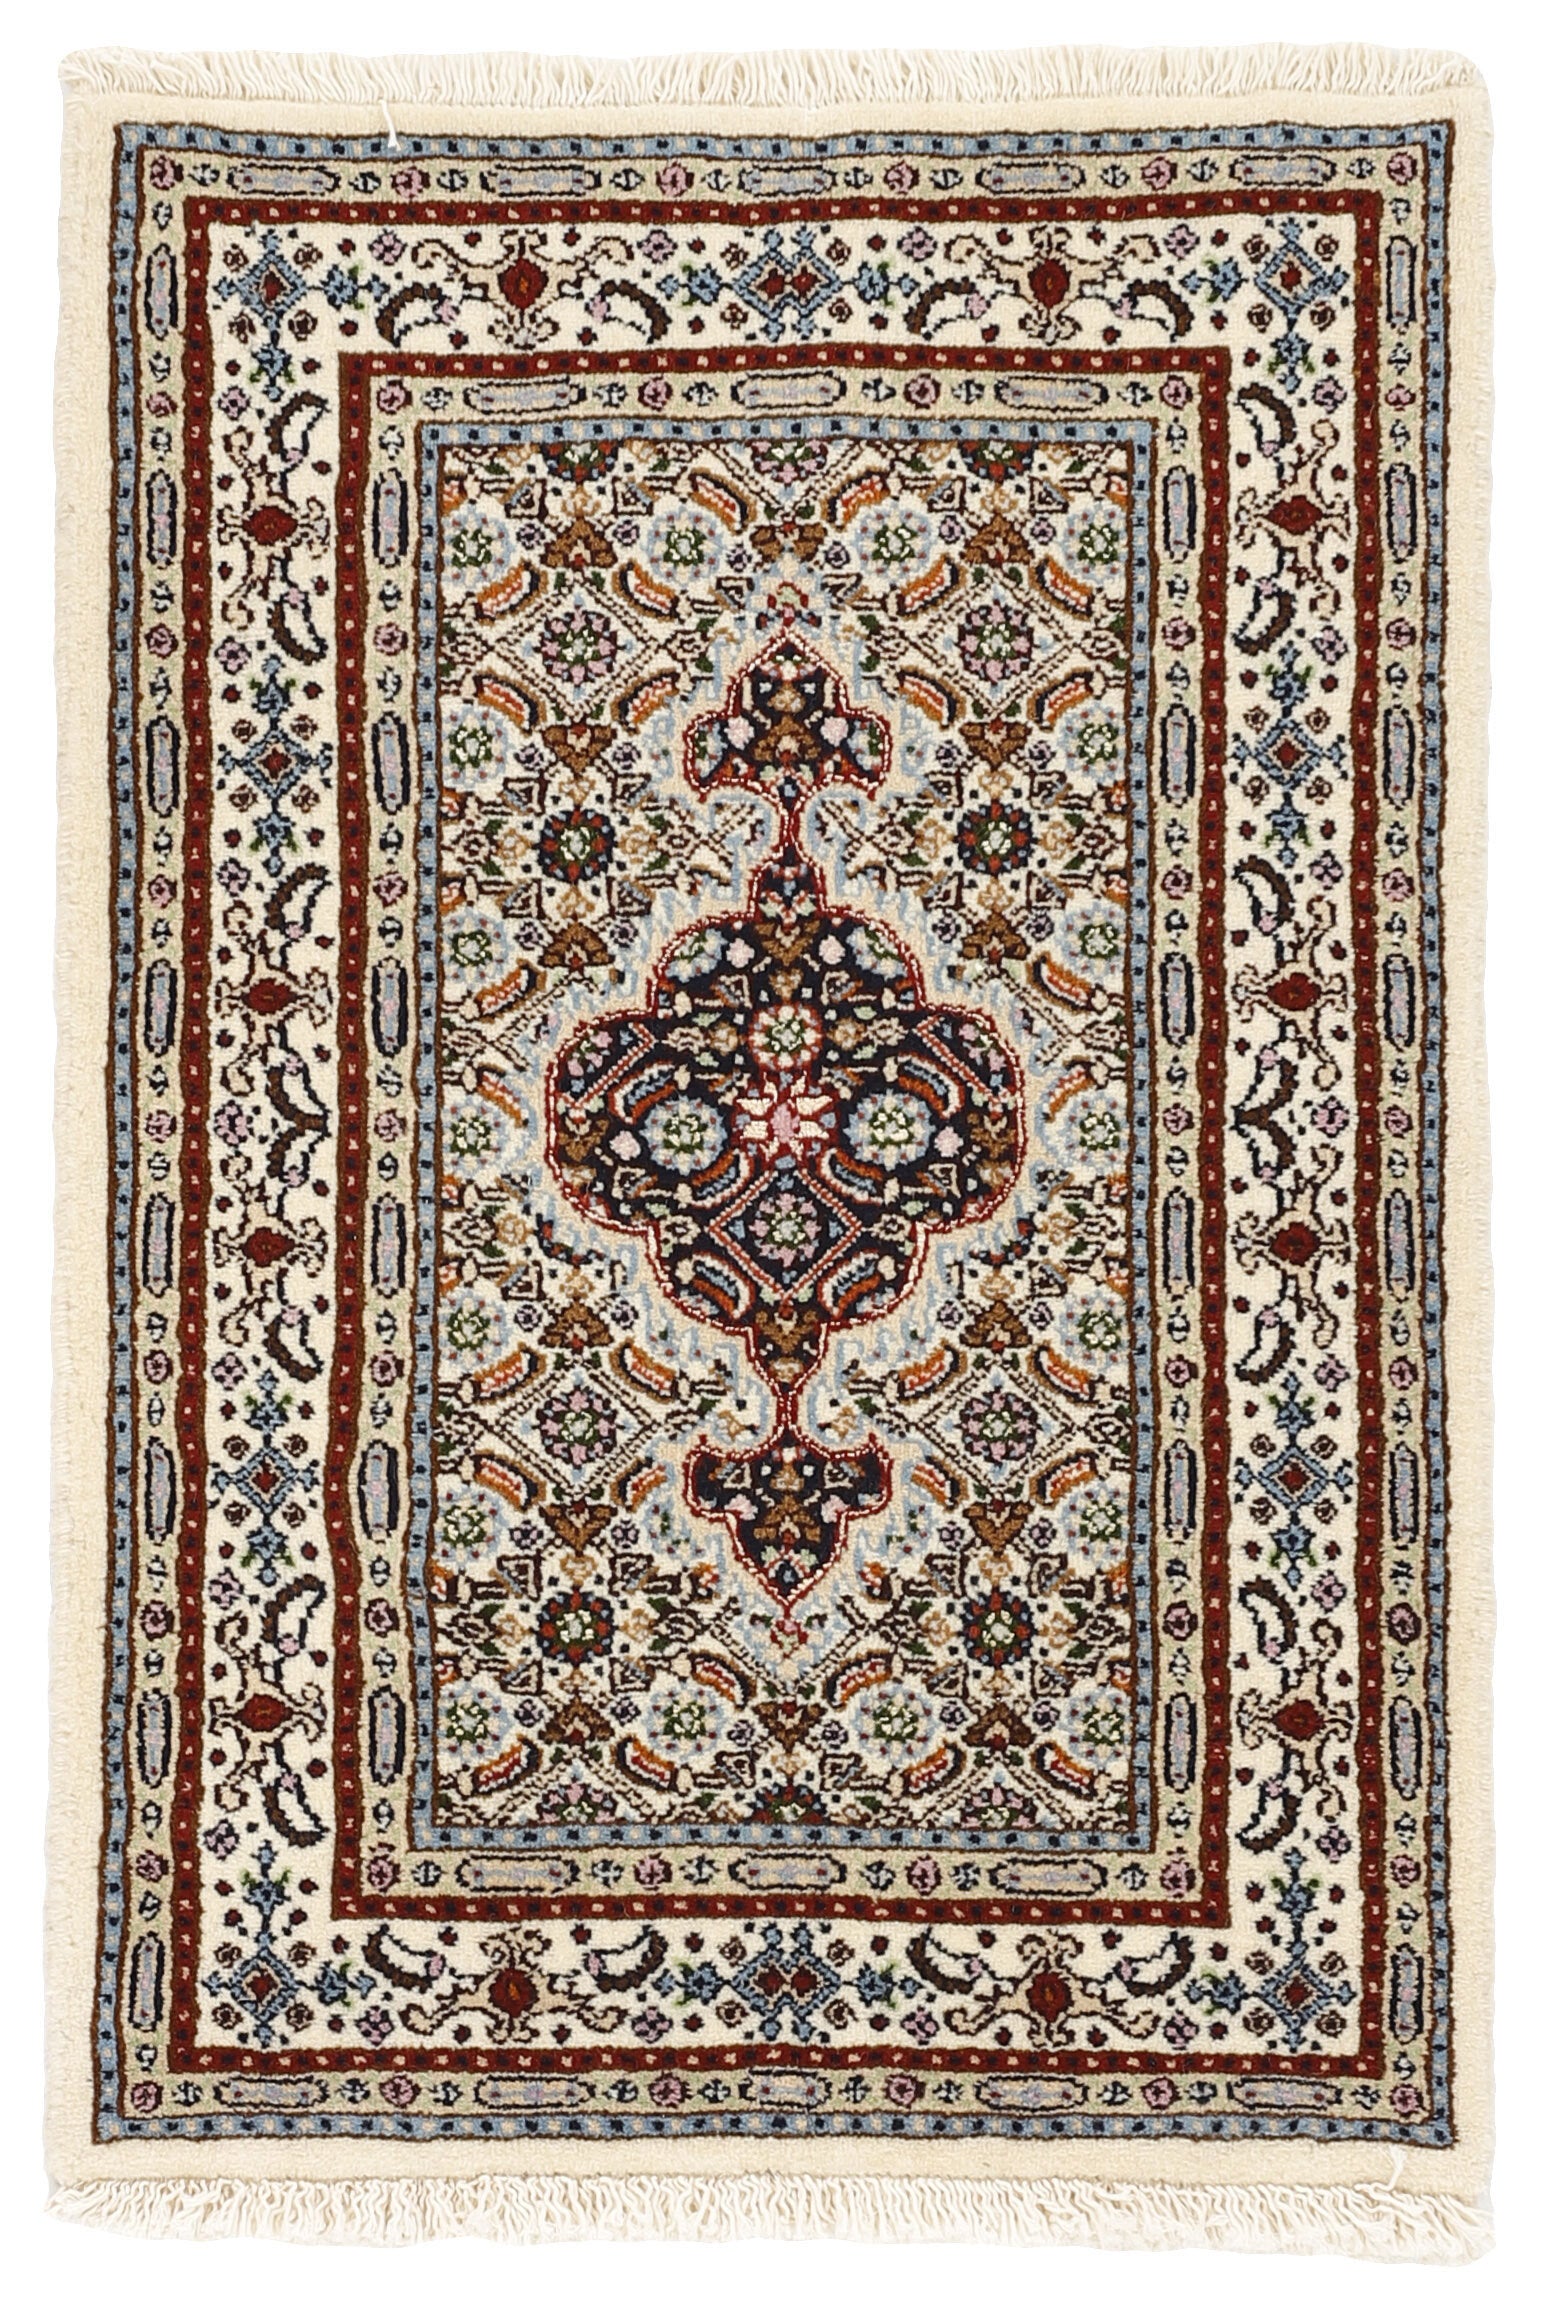 authentic persian rug with traditional floral pattern in red, pink, yellow, blue, green, cream, beige, brown and black